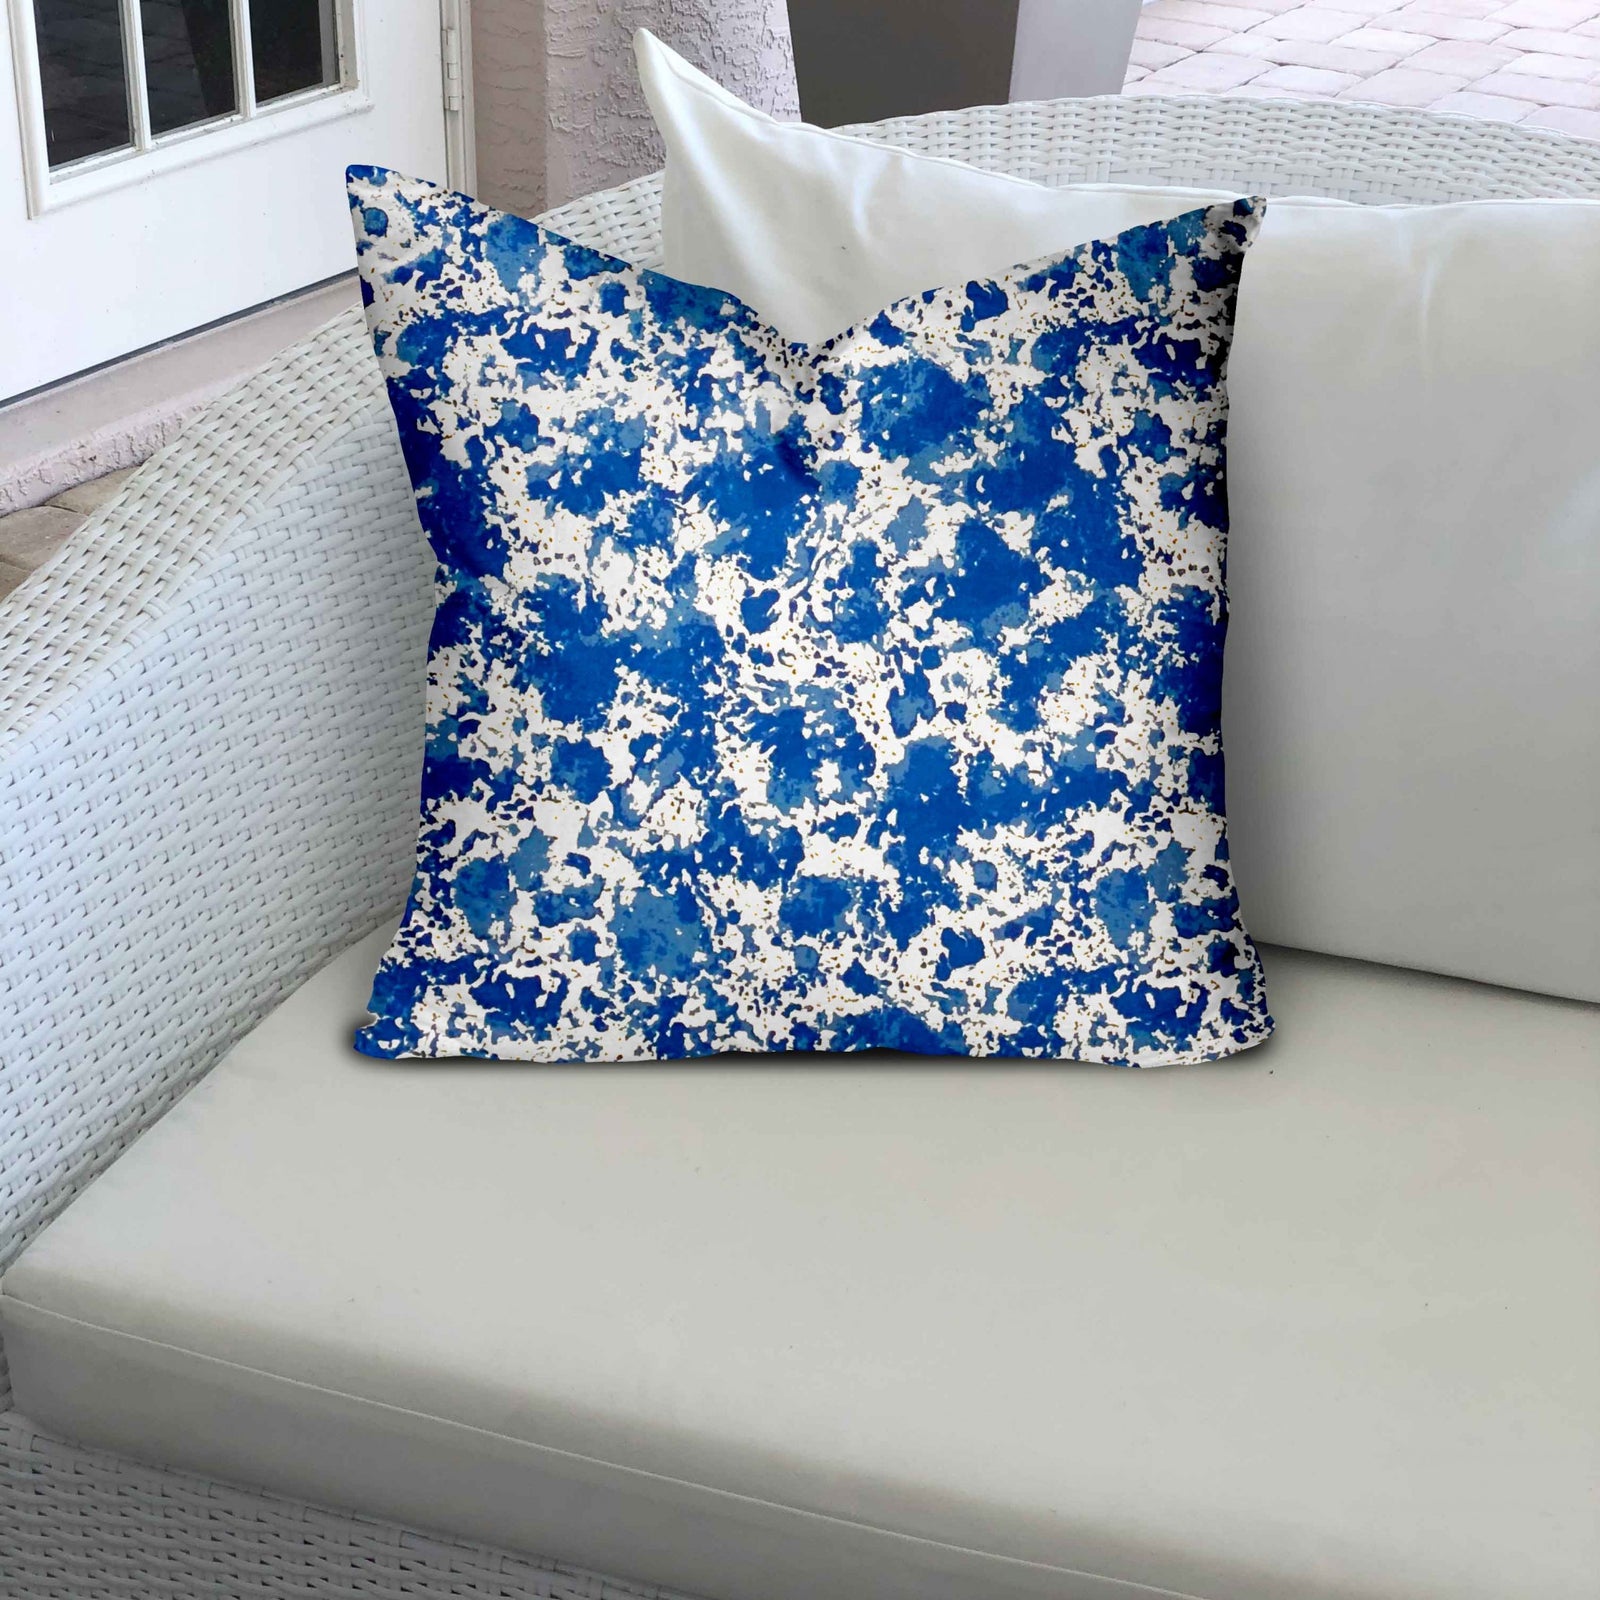 17" X 17" Blue And White Enveloped Coastal Throw Indoor Outdoor Pillow Cover